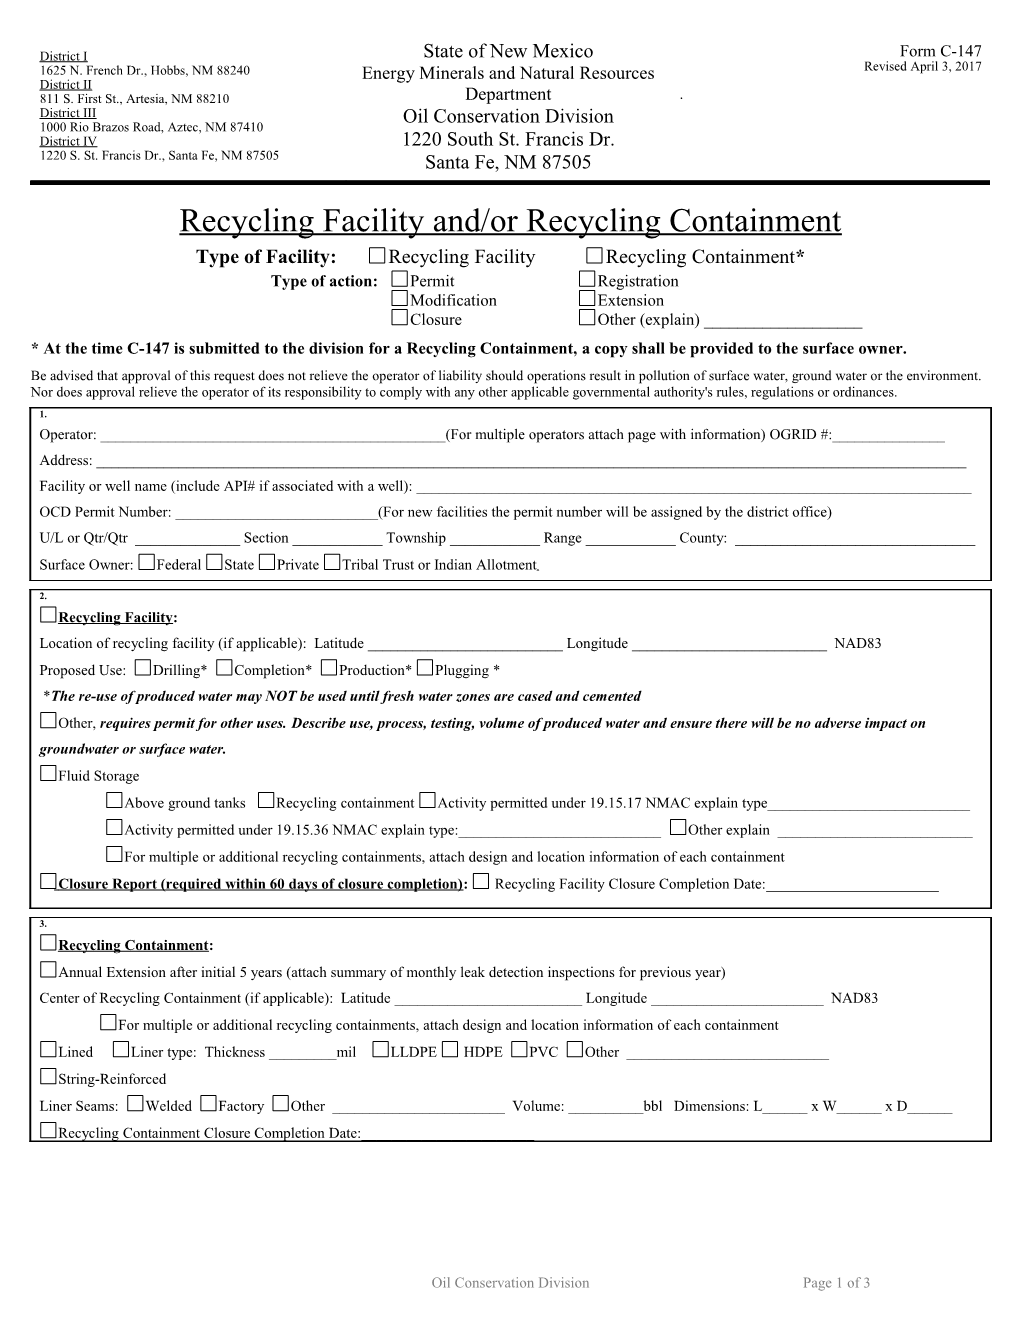 Recycling Facility And/Or Recycling Containment